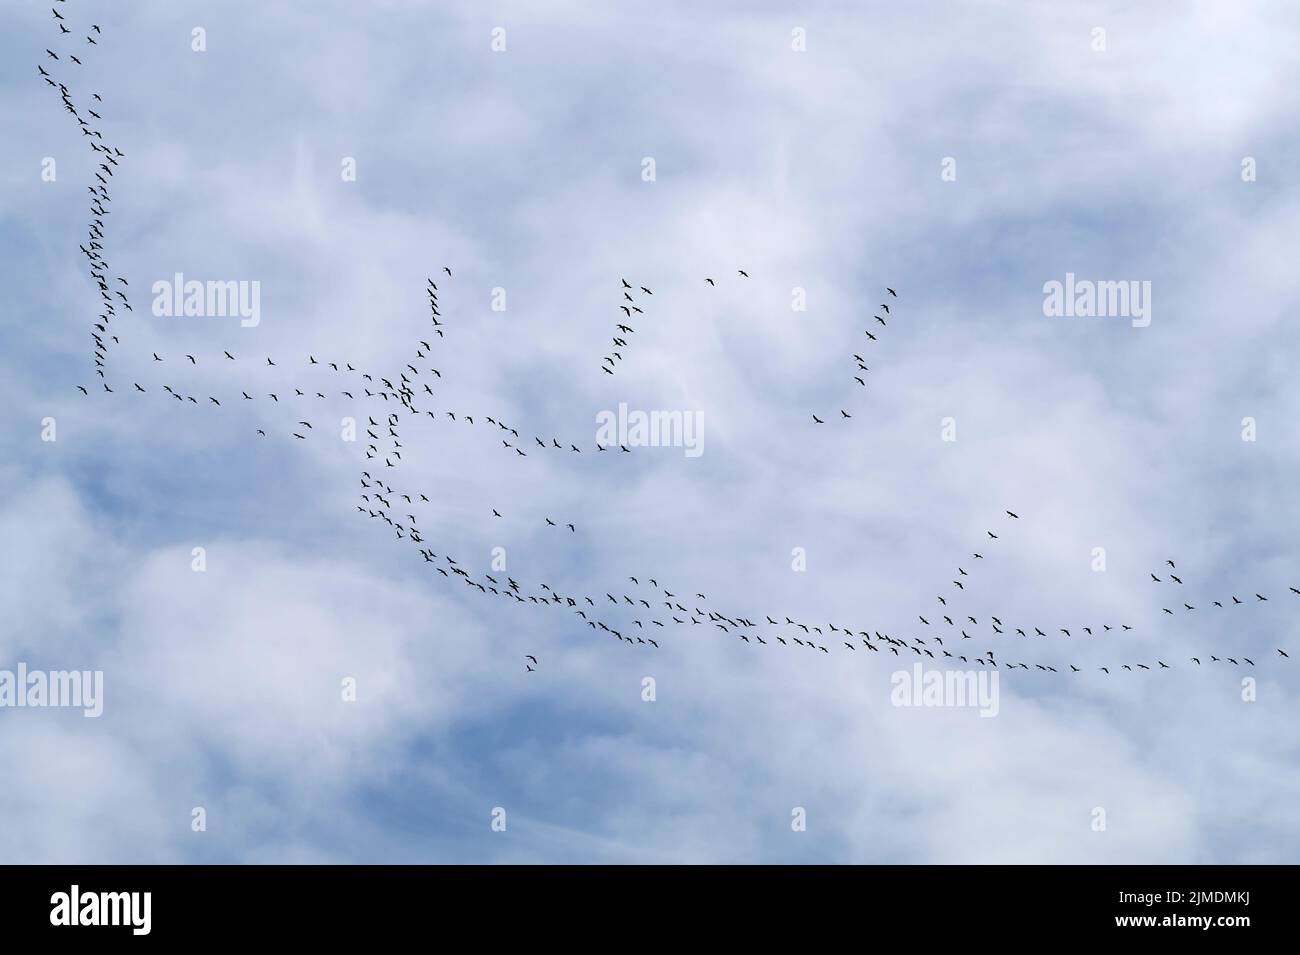 Common cranes in flight formation at passage of birds. Annual fall migration. Stock Photo